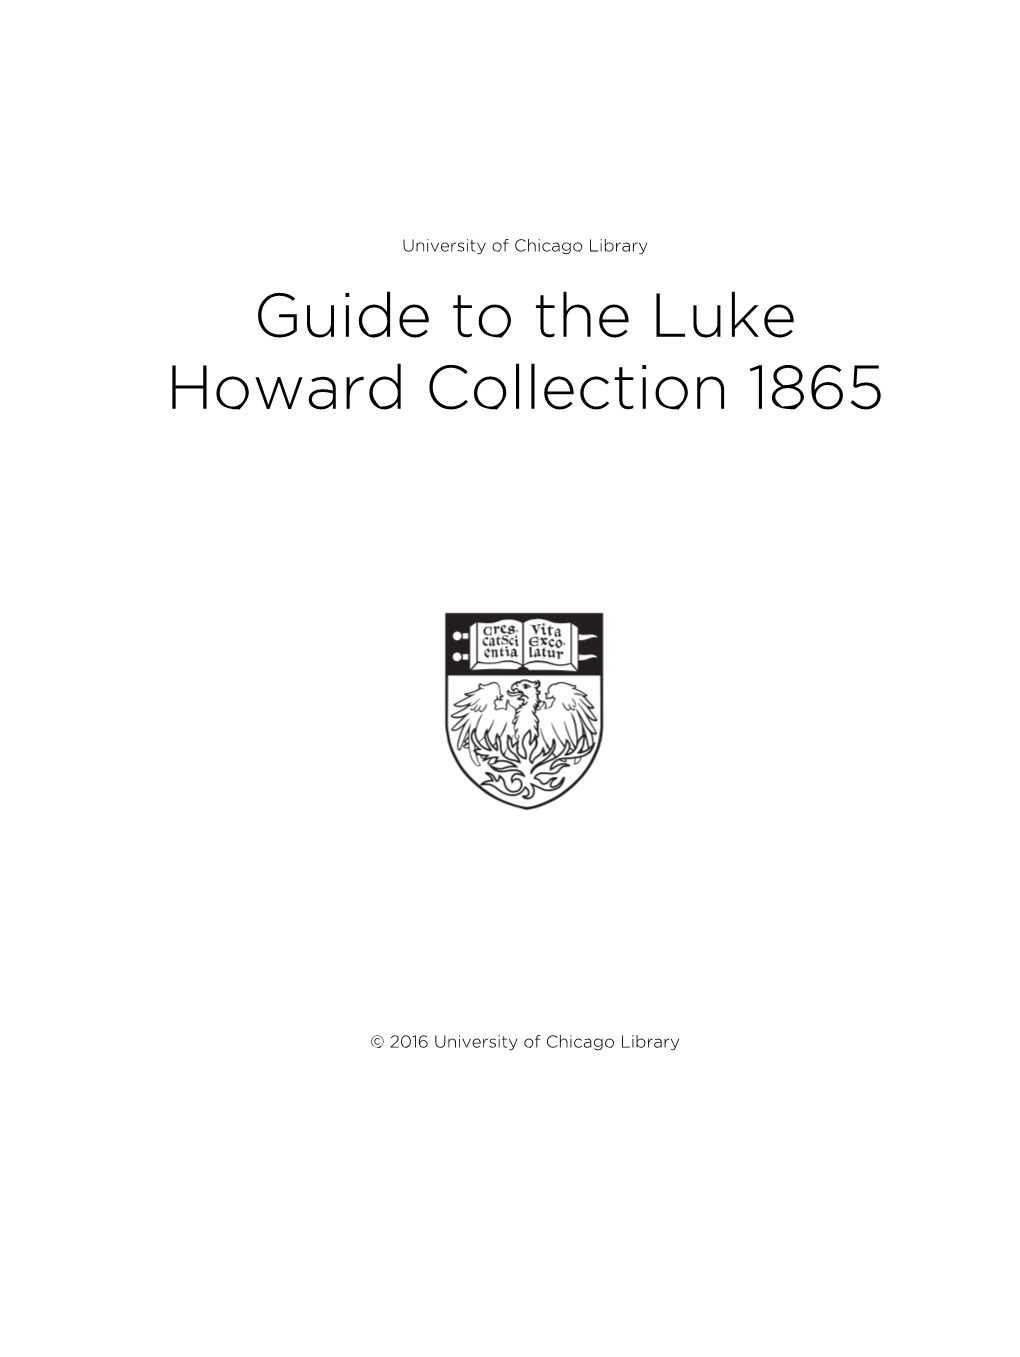 Guide to the Luke Howard Collection 1865